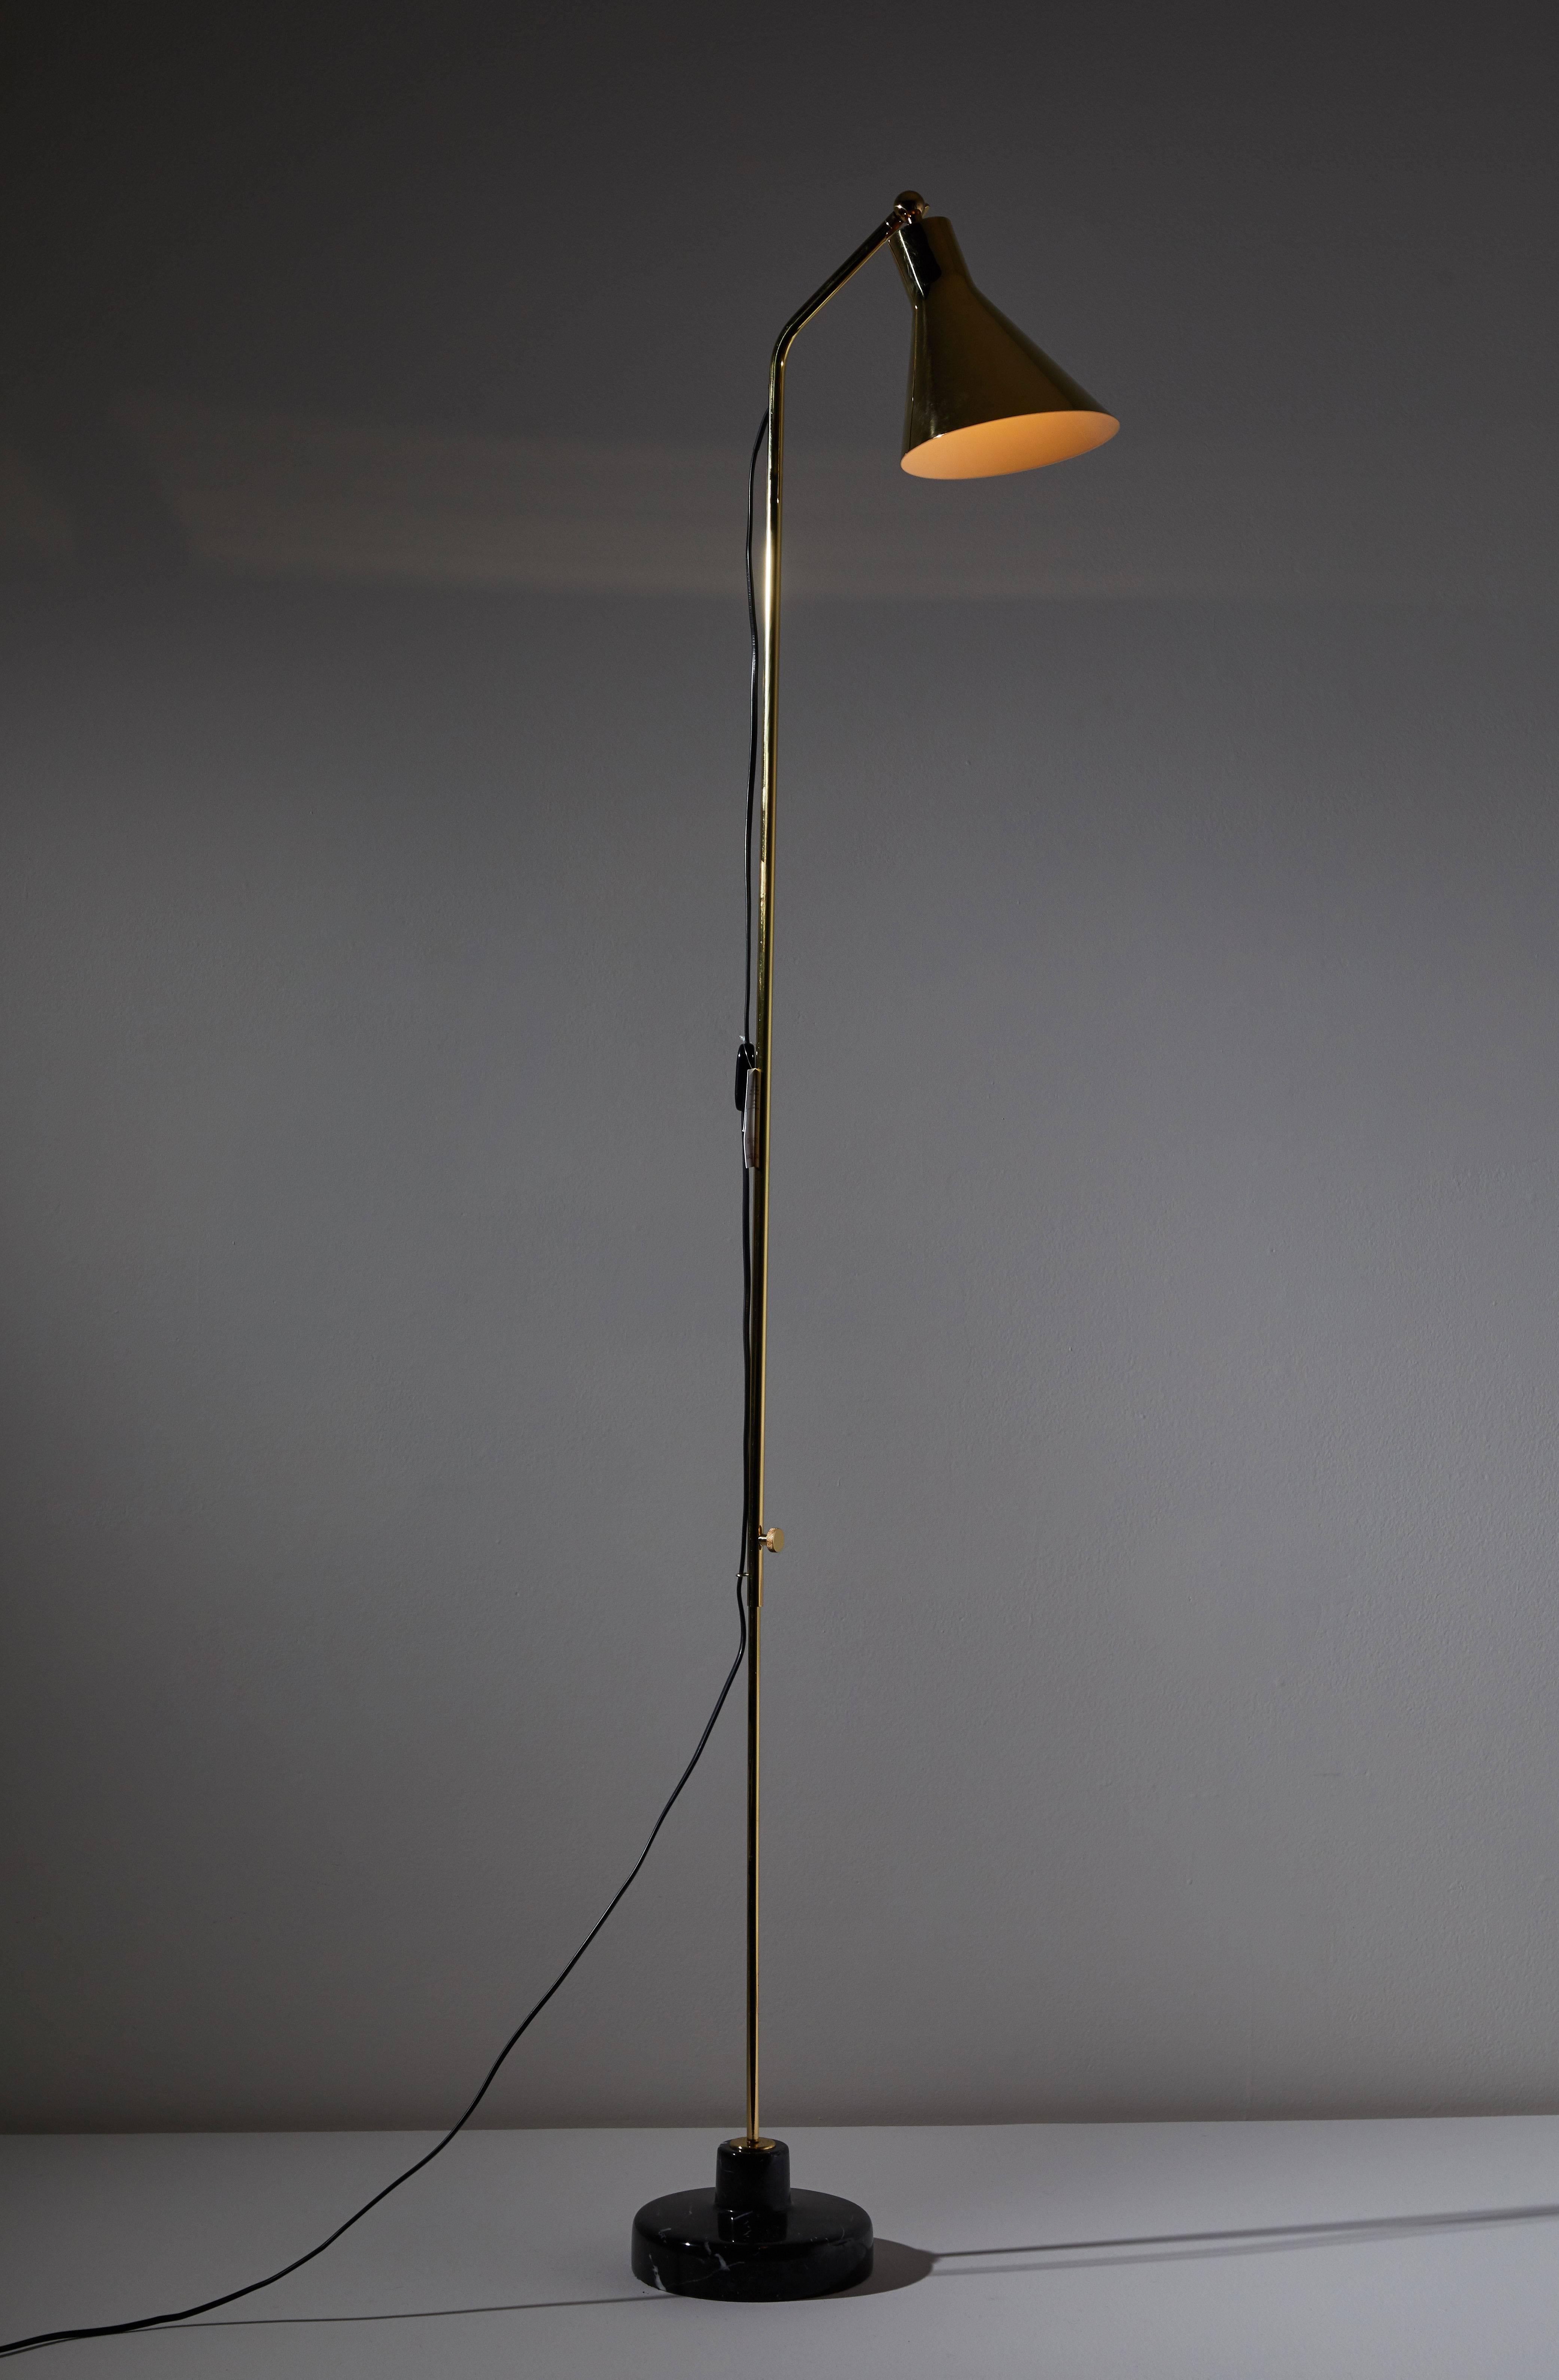 Alzabile floor lamp by Ignazio Gardella. Current production manufactured by TATO Italia. Brass with black marble base. Adjustable height and shade. Wired for US sockets.
Bulb type working voltage 110/240 V 1 x LED max 6W E27/E26 Class: II / IP